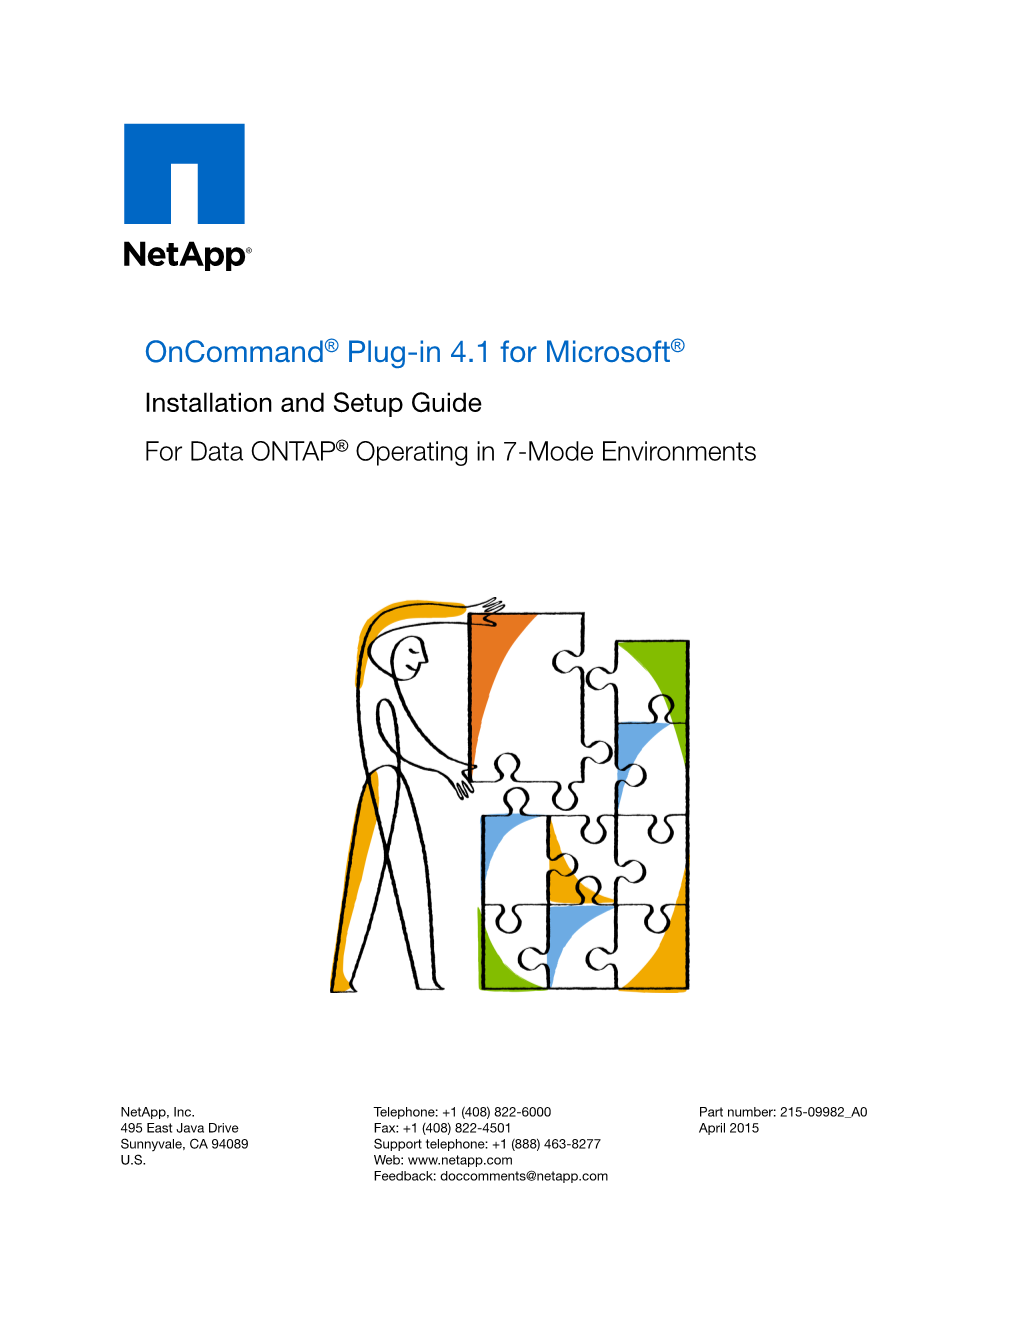 Oncommand Plug-In 4.1 for Microsoft Installation and Setup Guide for Data ONTAP Operating in 7-Mode Environments